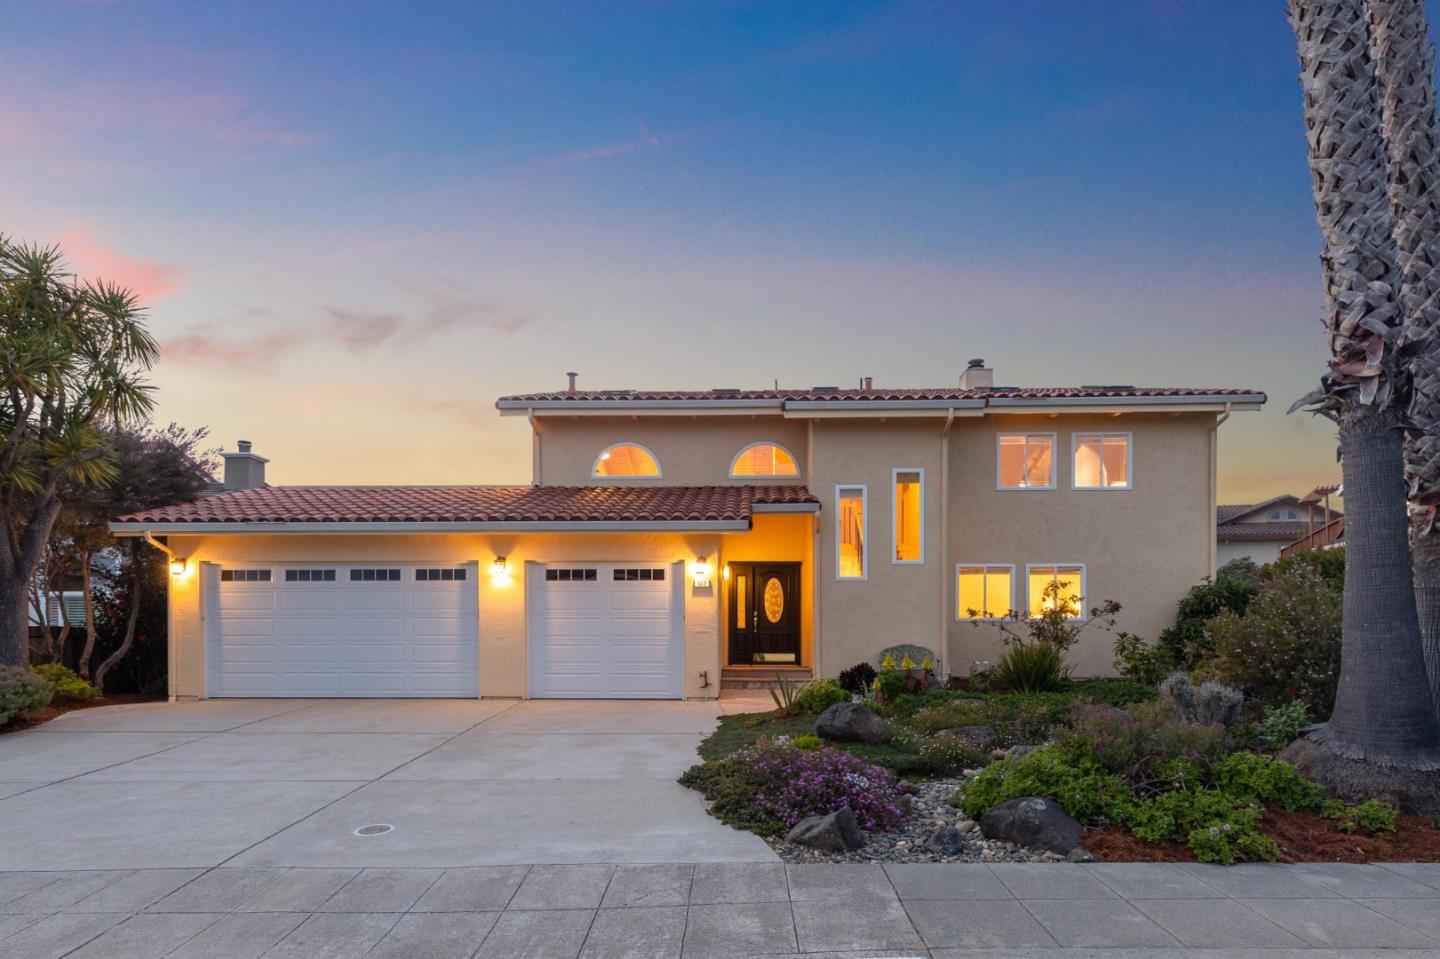 Photo of 522 Highland Ave in Half Moon Bay, CA